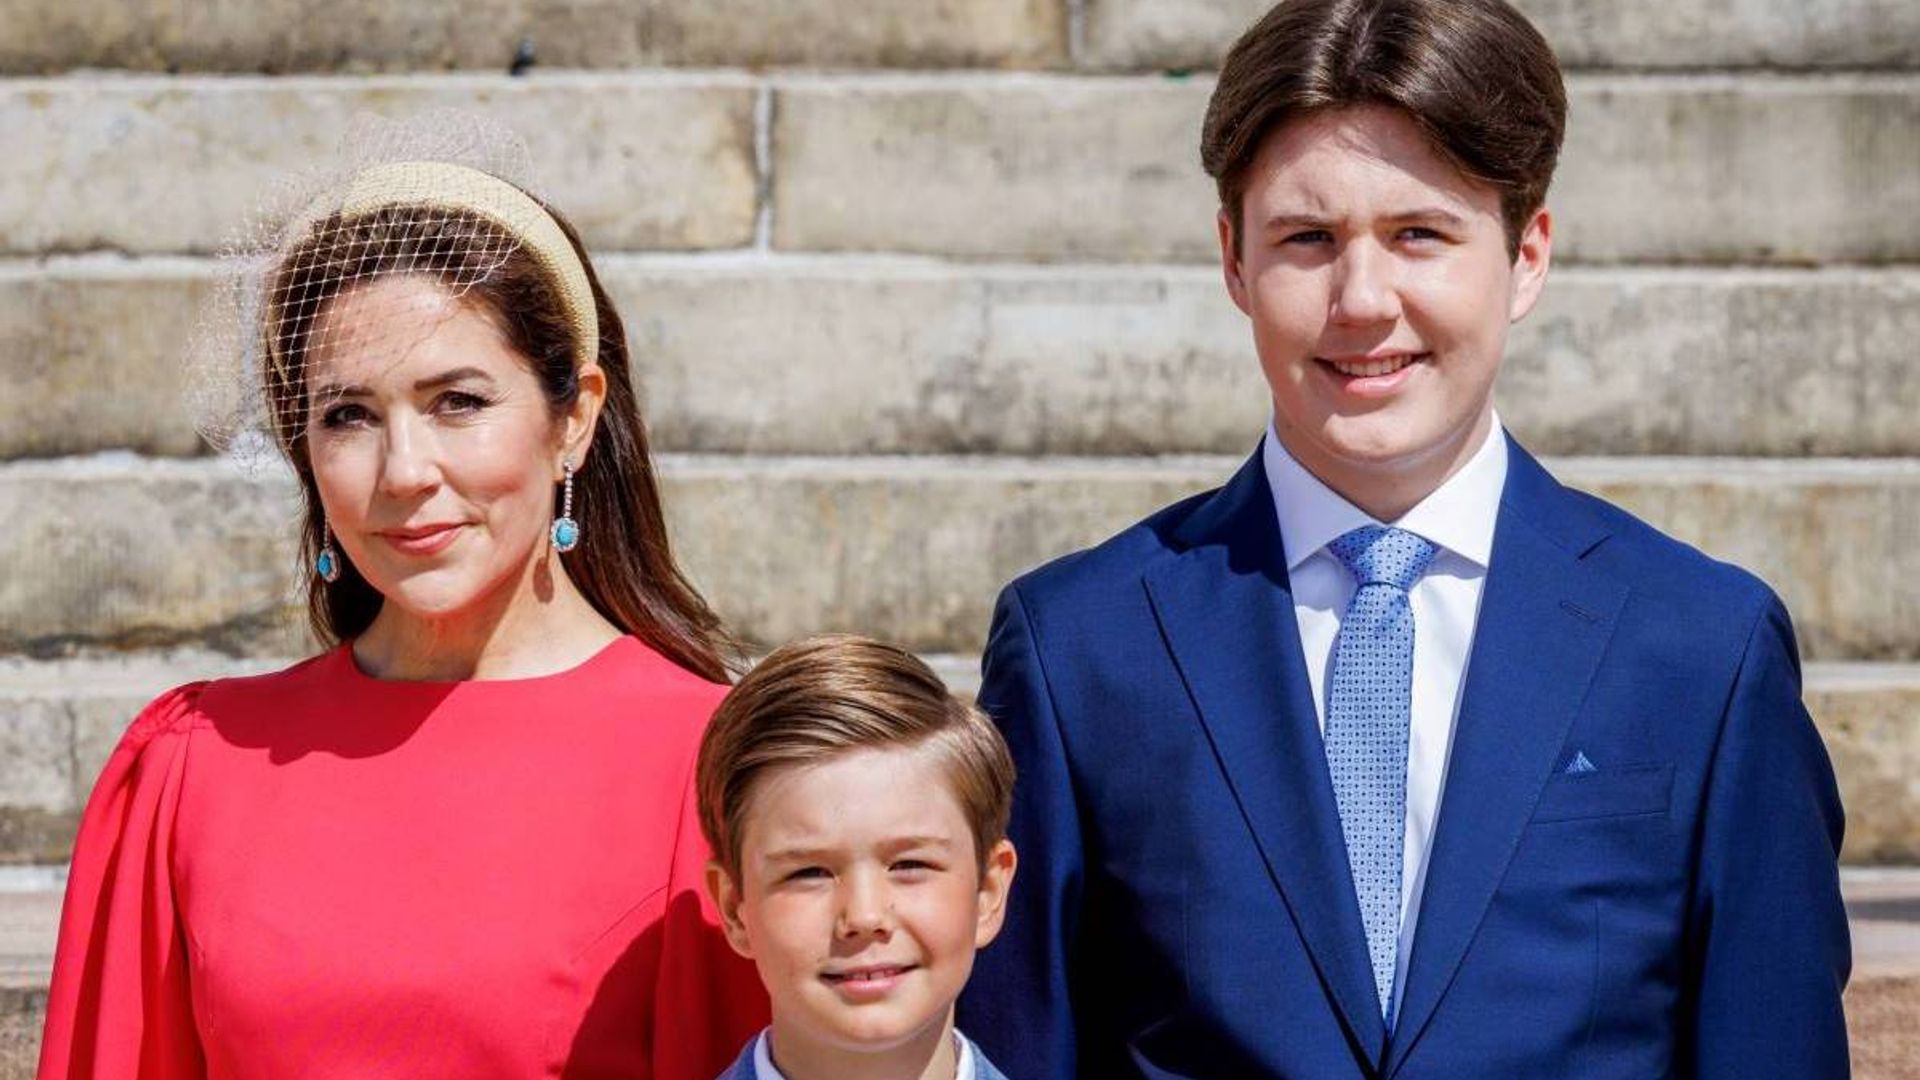 Royal family release shocking statement as they remove son from school